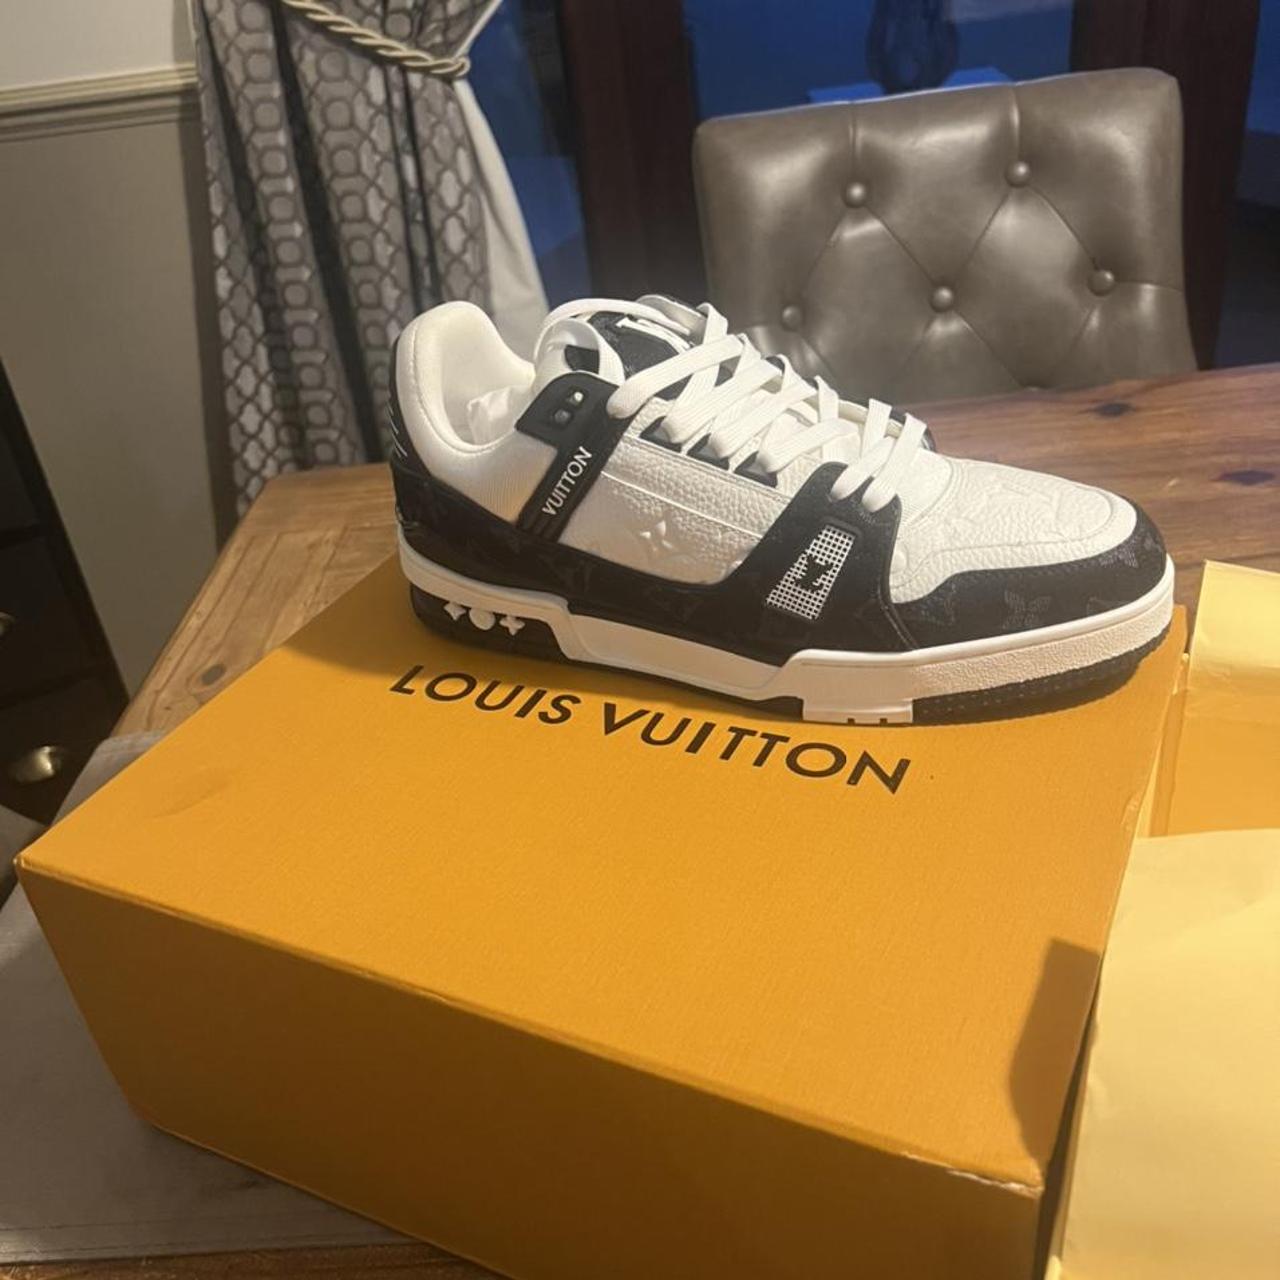 Louis Vuitton trainers Brand new never worn Comes... - Depop